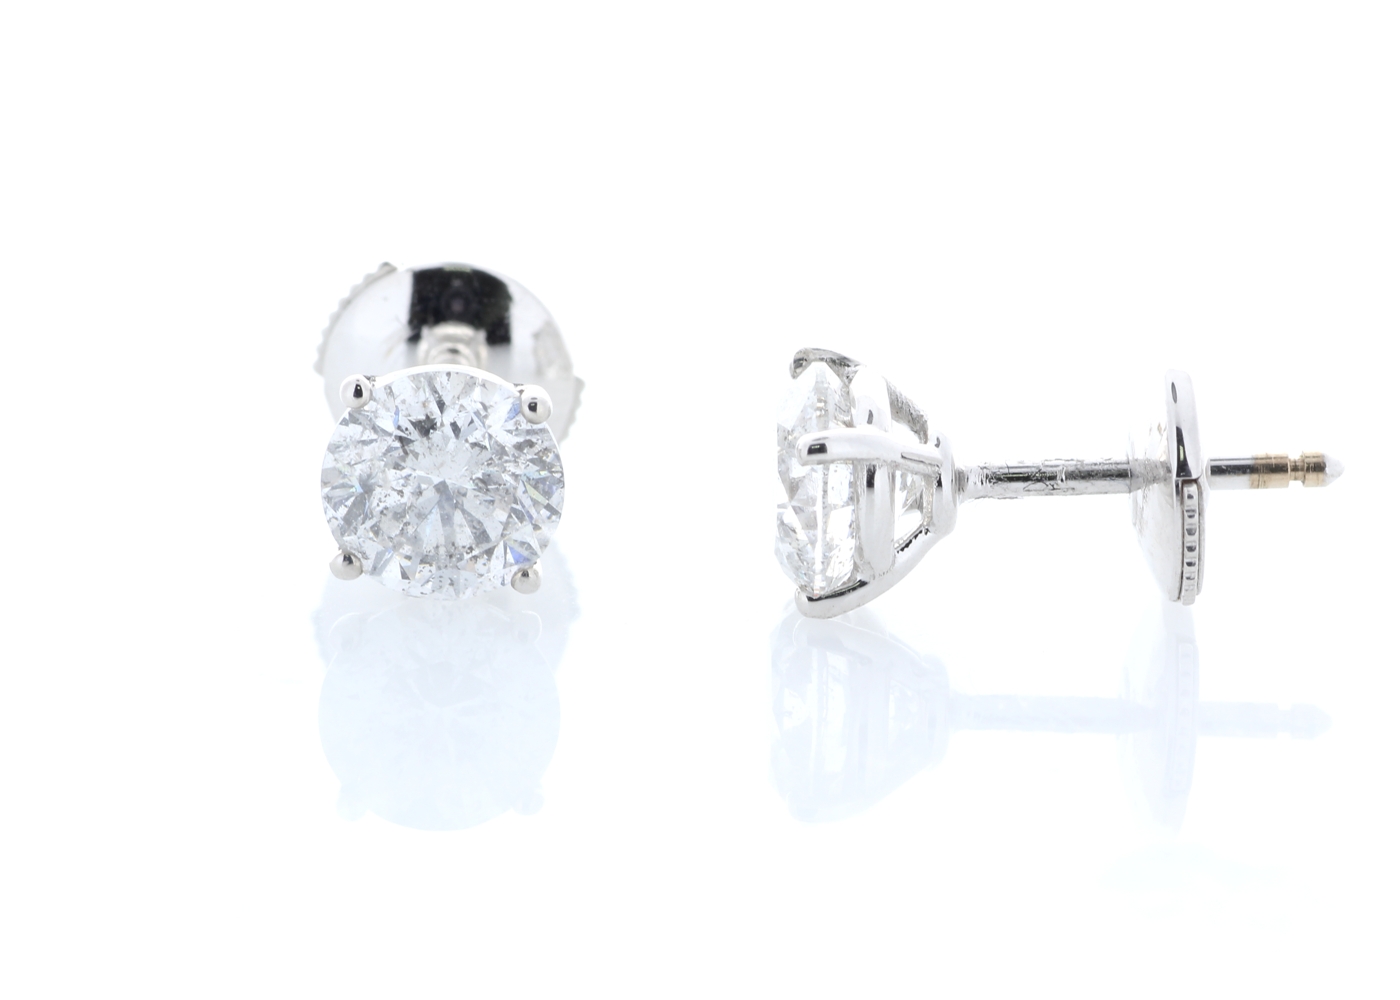 18ct White Gold Claw Set Diamond Earrings 2.36 Carats - Image 2 of 4